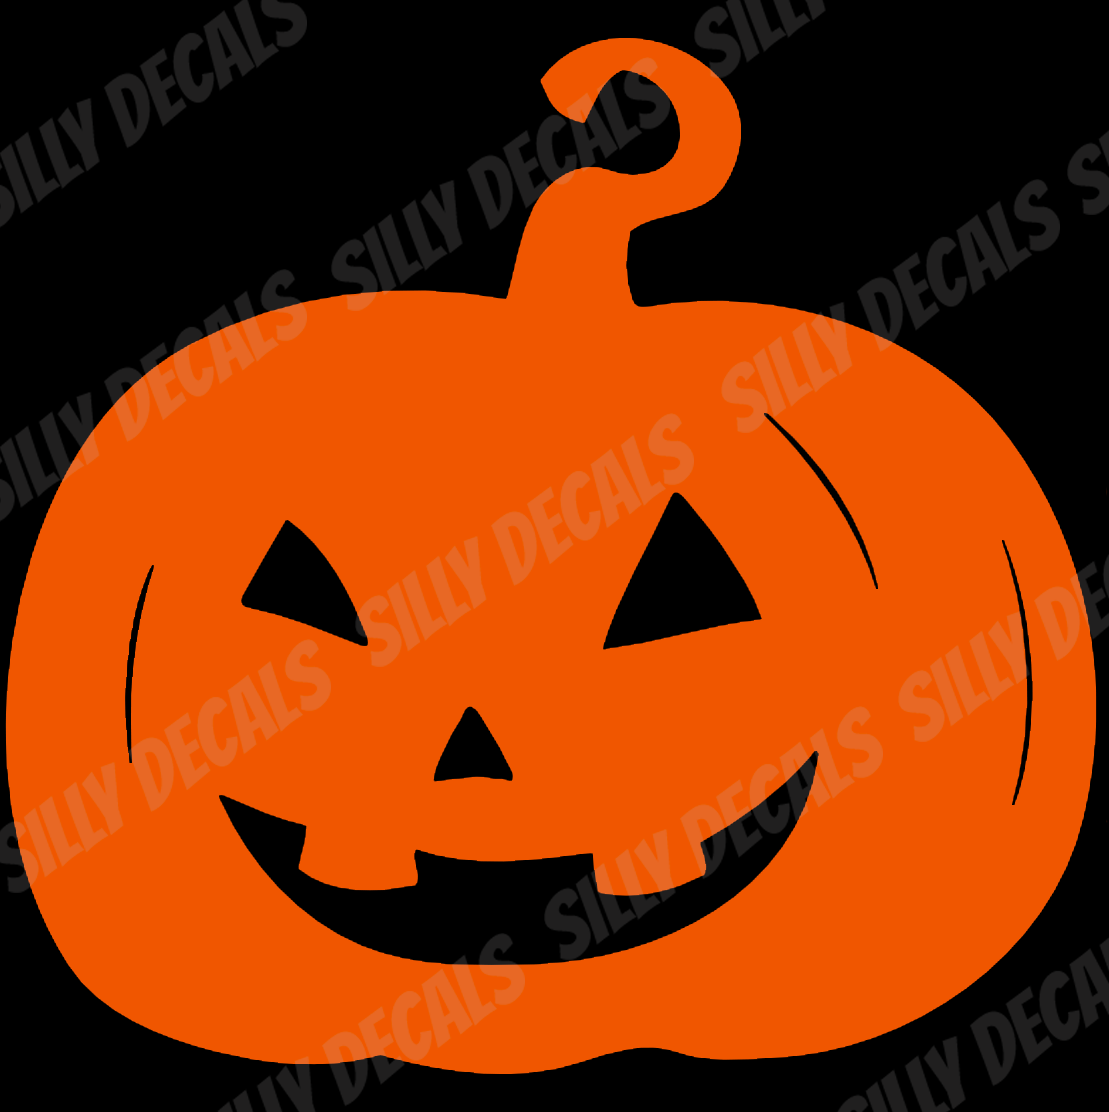 Jack-O'-Lantern; Pumpkin Halloween Horror Vinyl Decals Suitable For Cars, Windows, Walls, and More!